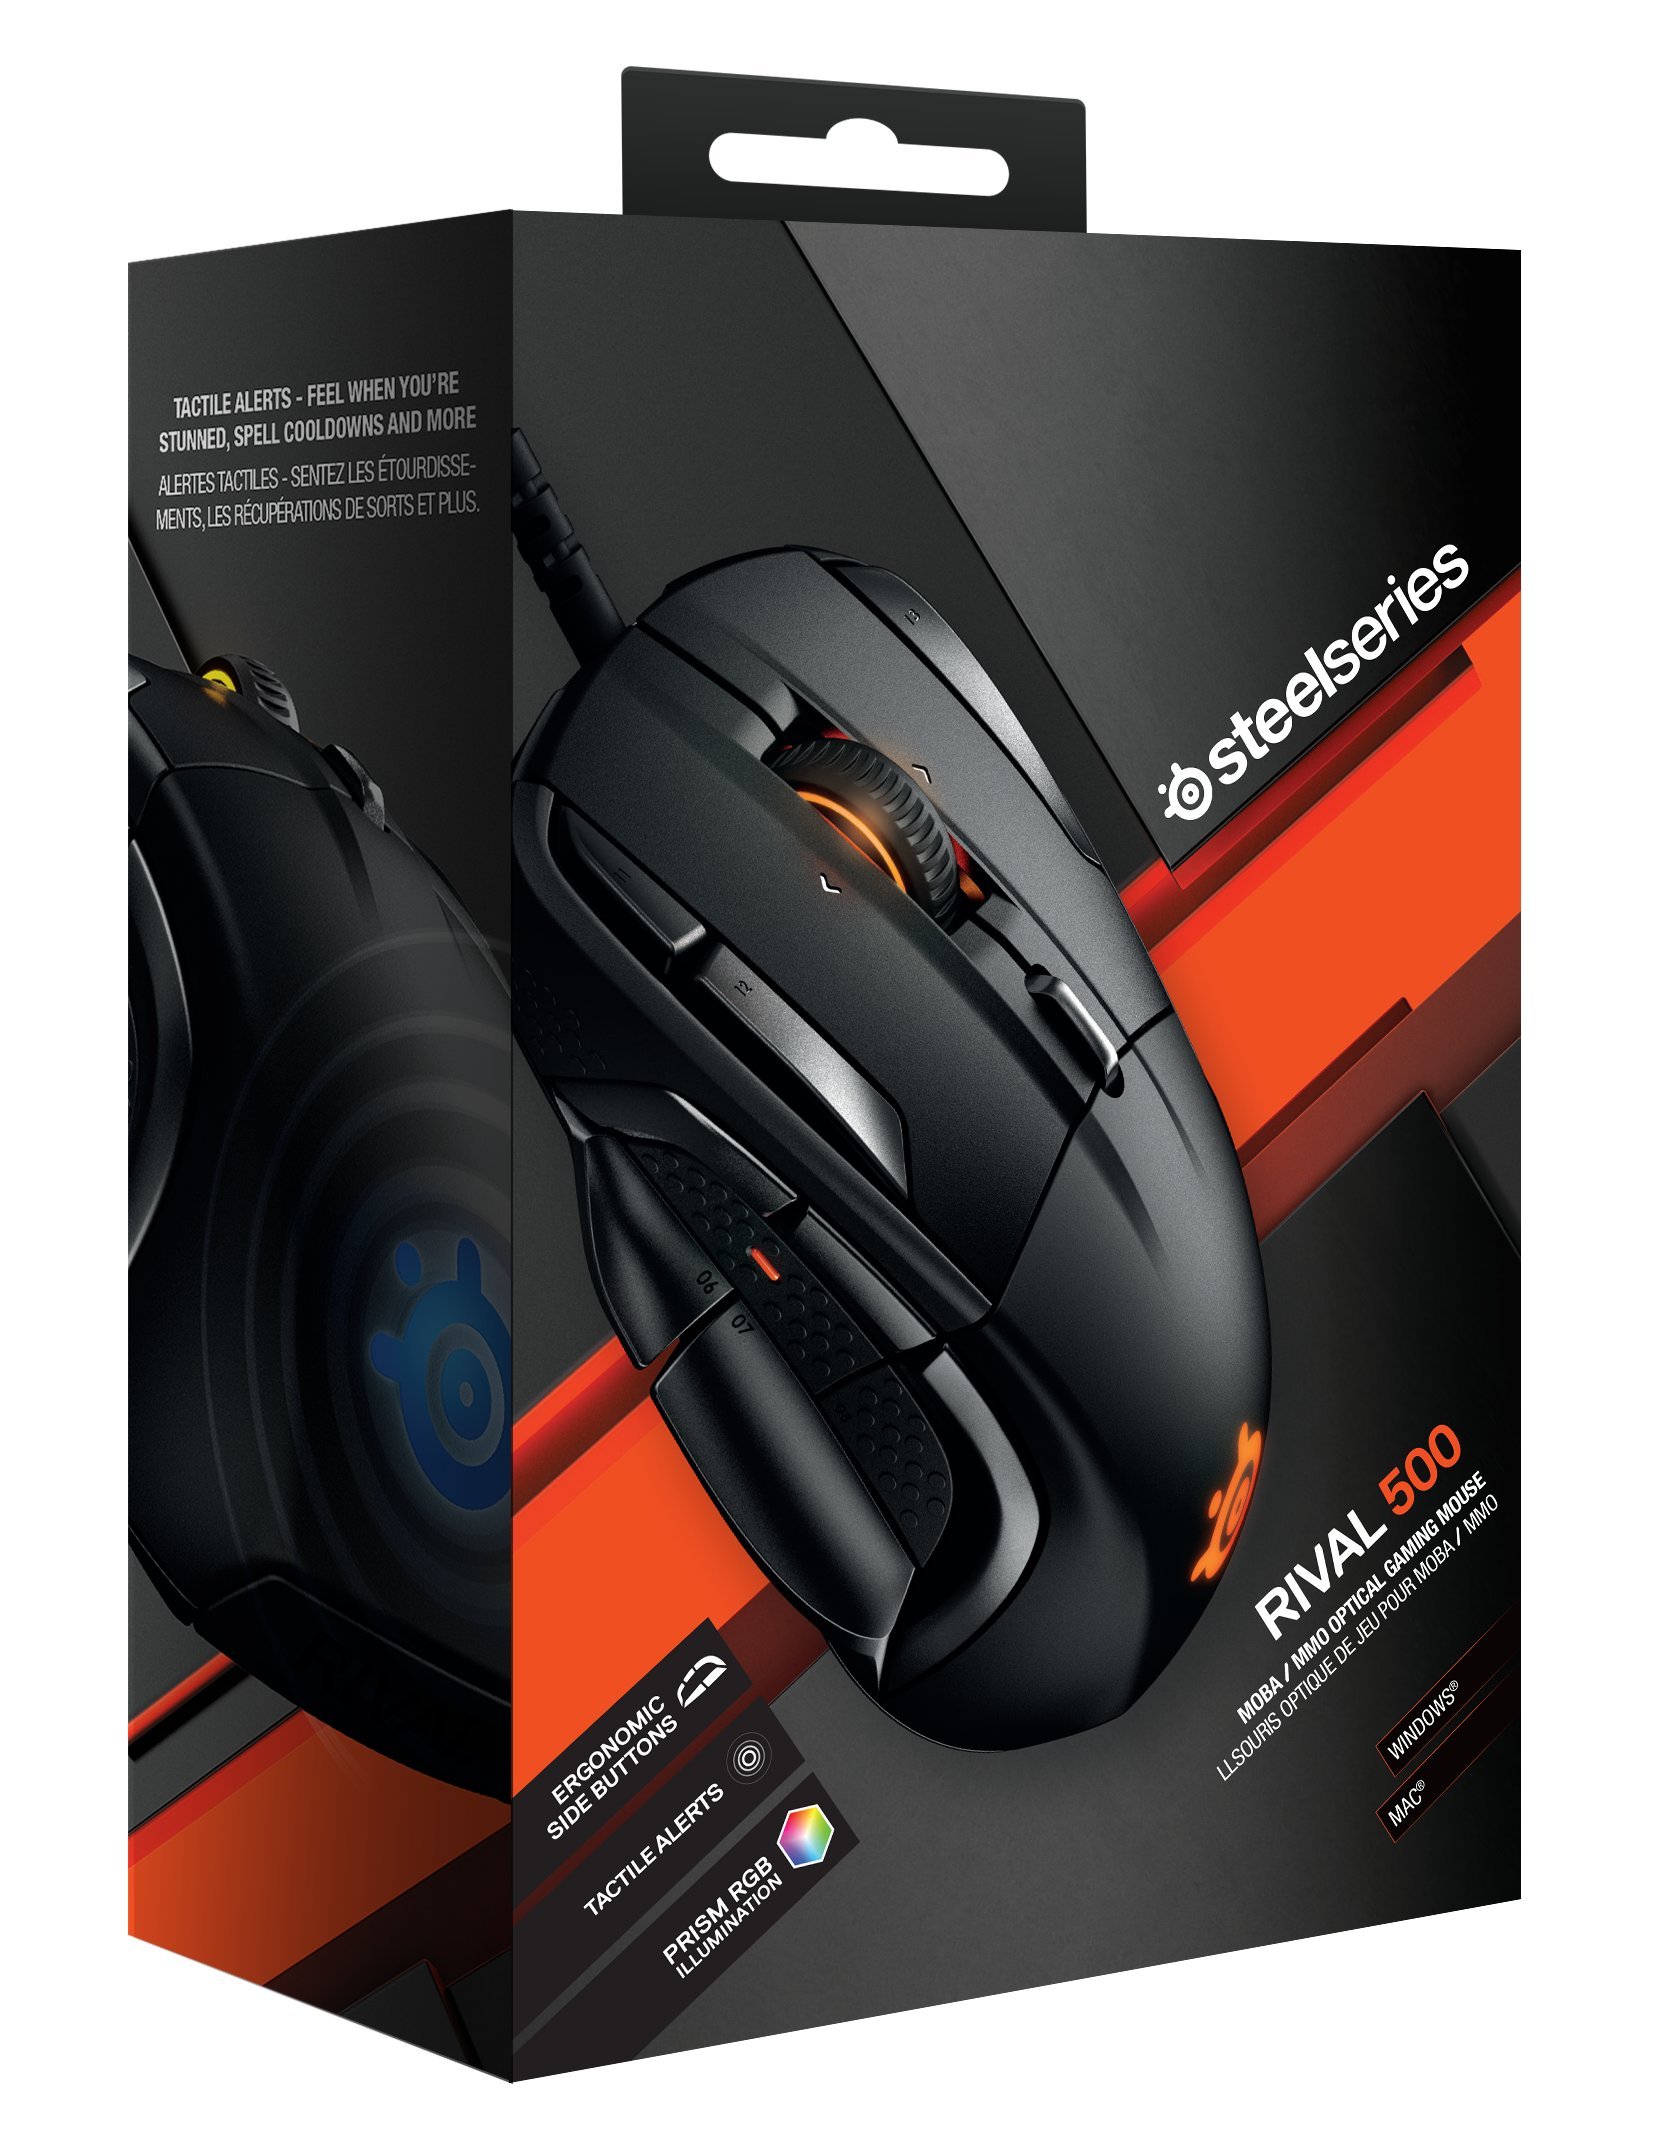 SteelSeries Rival 500 MMO/MOBA 15-Button Programmable Gaming Mouse - 16,000 CPI, Black